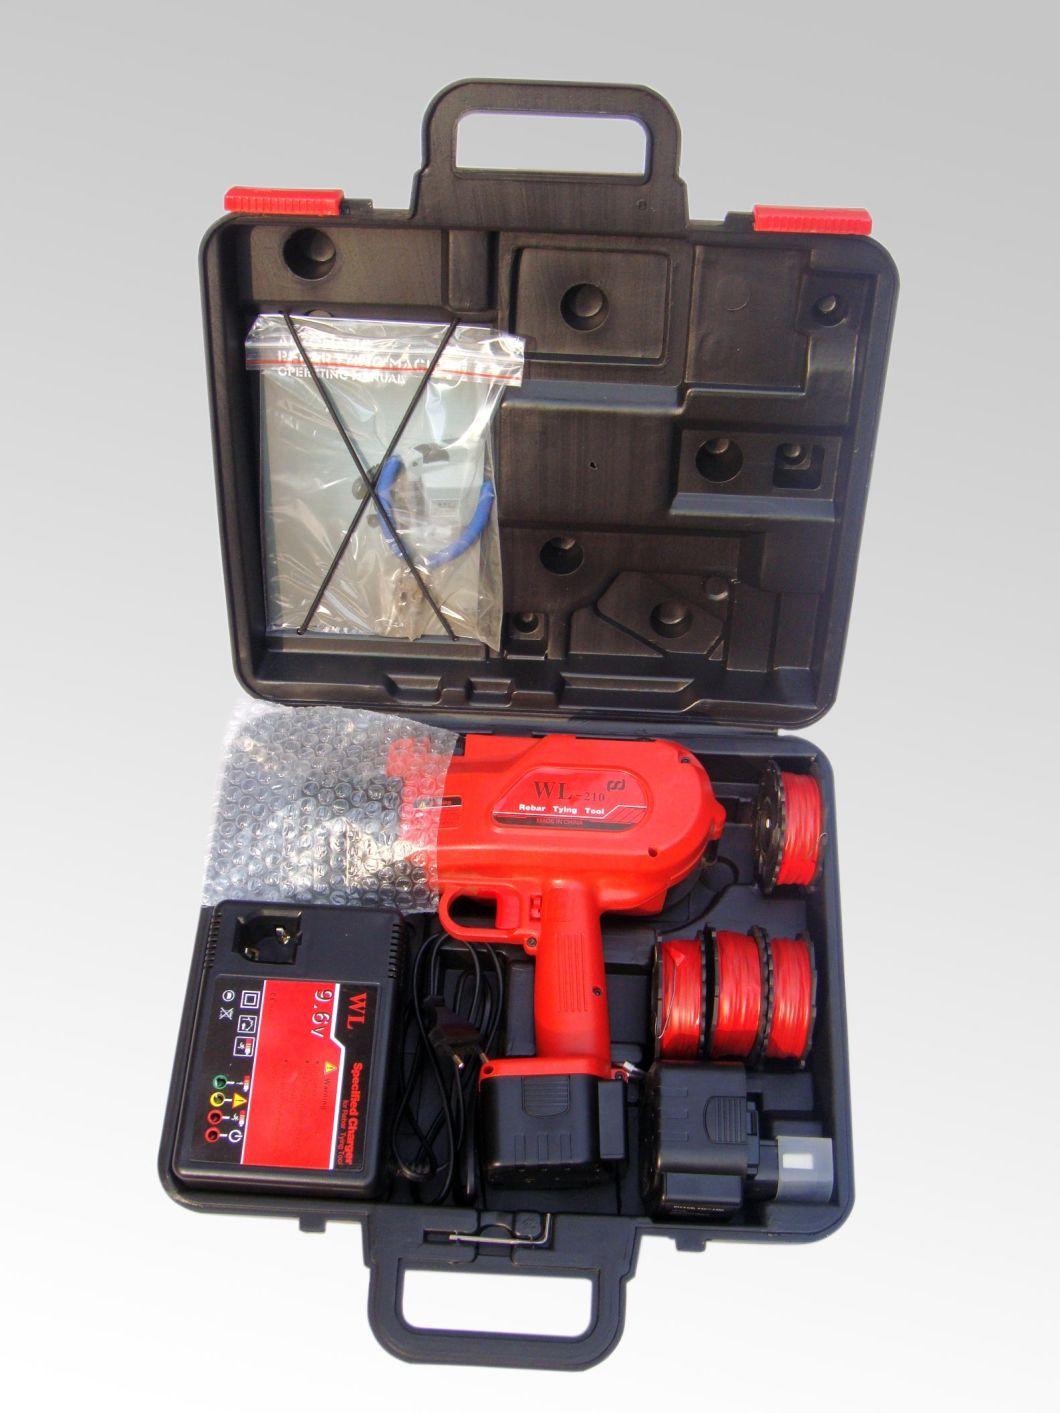 Ce Approved Wl-210 Automatic Reinforcing Steel Bar Rebar Tying Tool